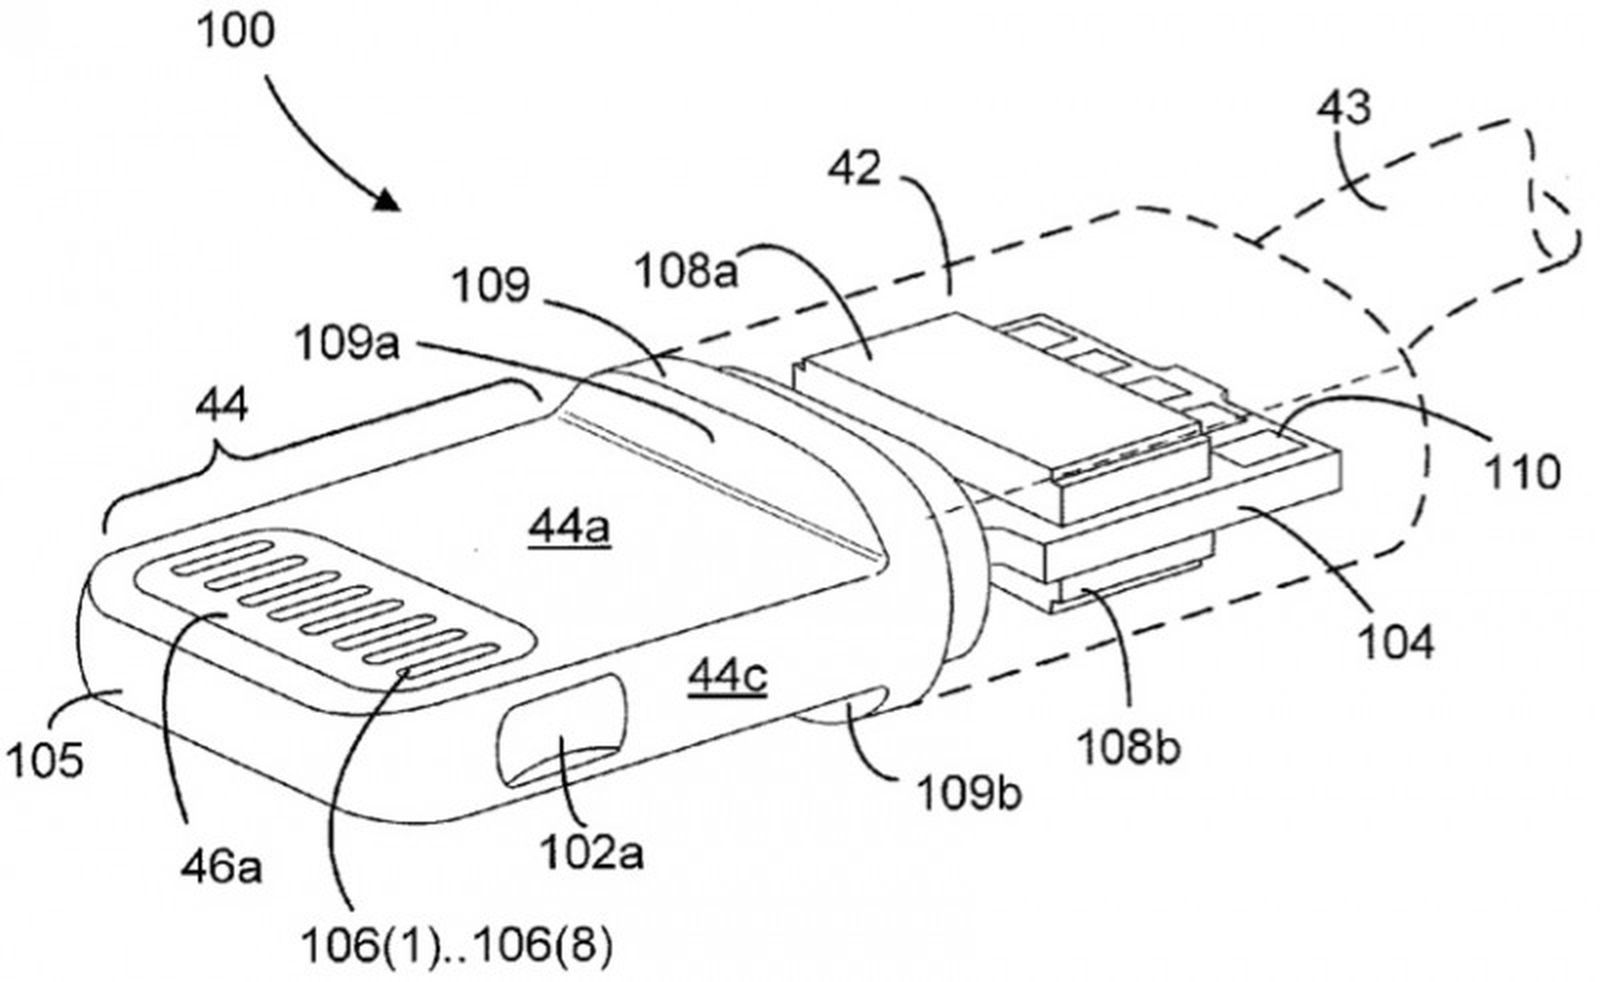 Apple's Lightning Connector Detailed in Newly-Published Patent Applications  - MacRumors Electrical Wiring Diagrams PDF MacRumors